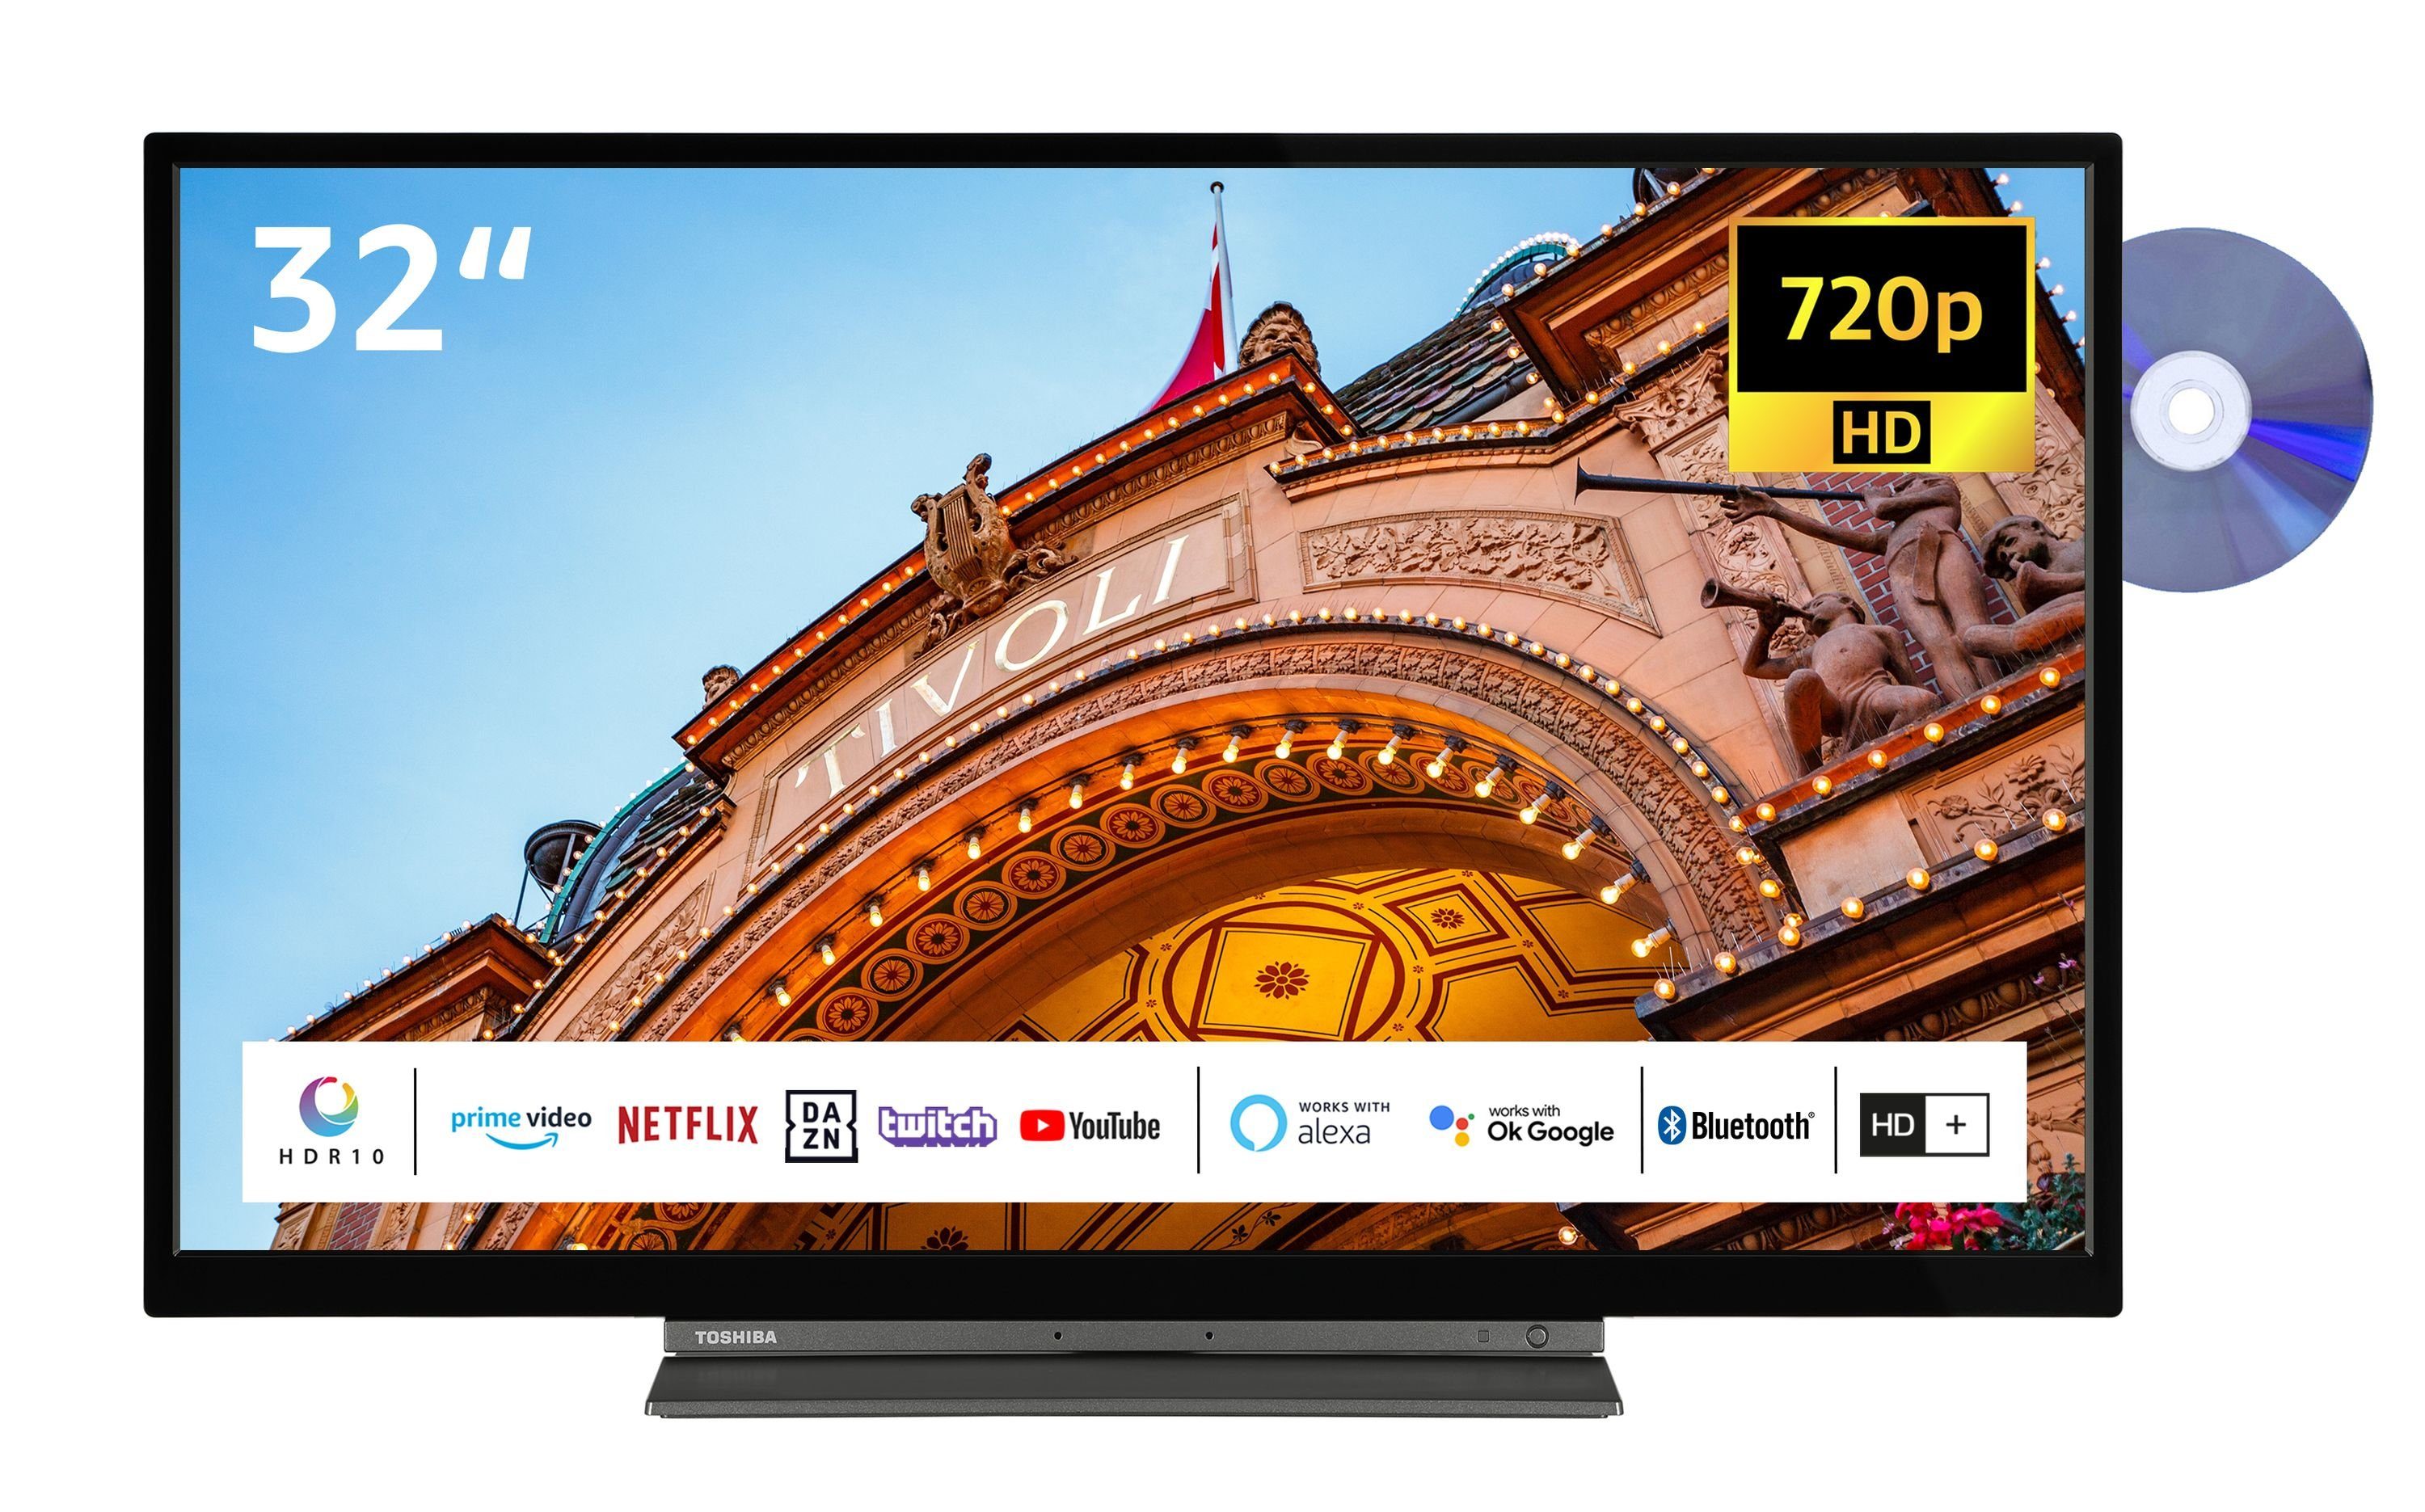 TV, DVD-Player, Triple-Tuner, inklusive) 32WD3C63DAY/2 HD-ready, Fernseher Monate cm/32 HD+ (80 Toshiba Smart HDR, 6 LCD-LED Zoll,